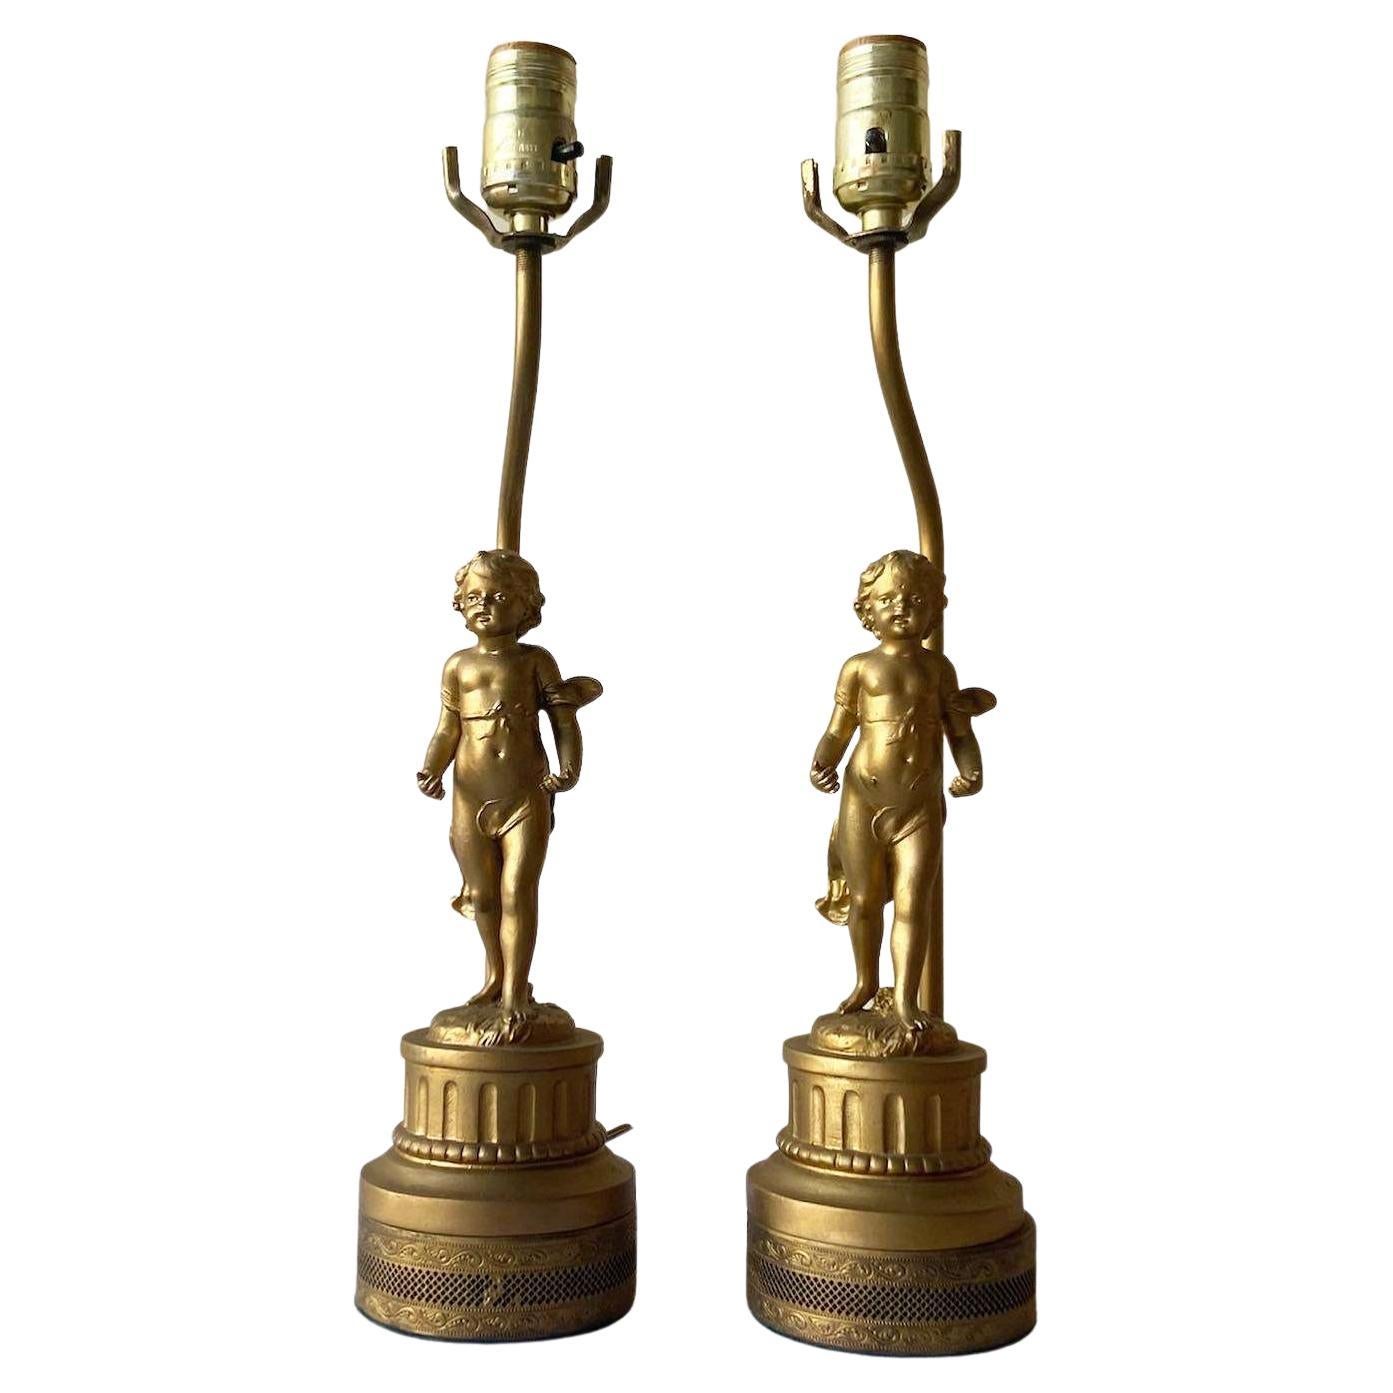 French Gilt Cherub Figural Torch Table Lamps - a Pair For Sale